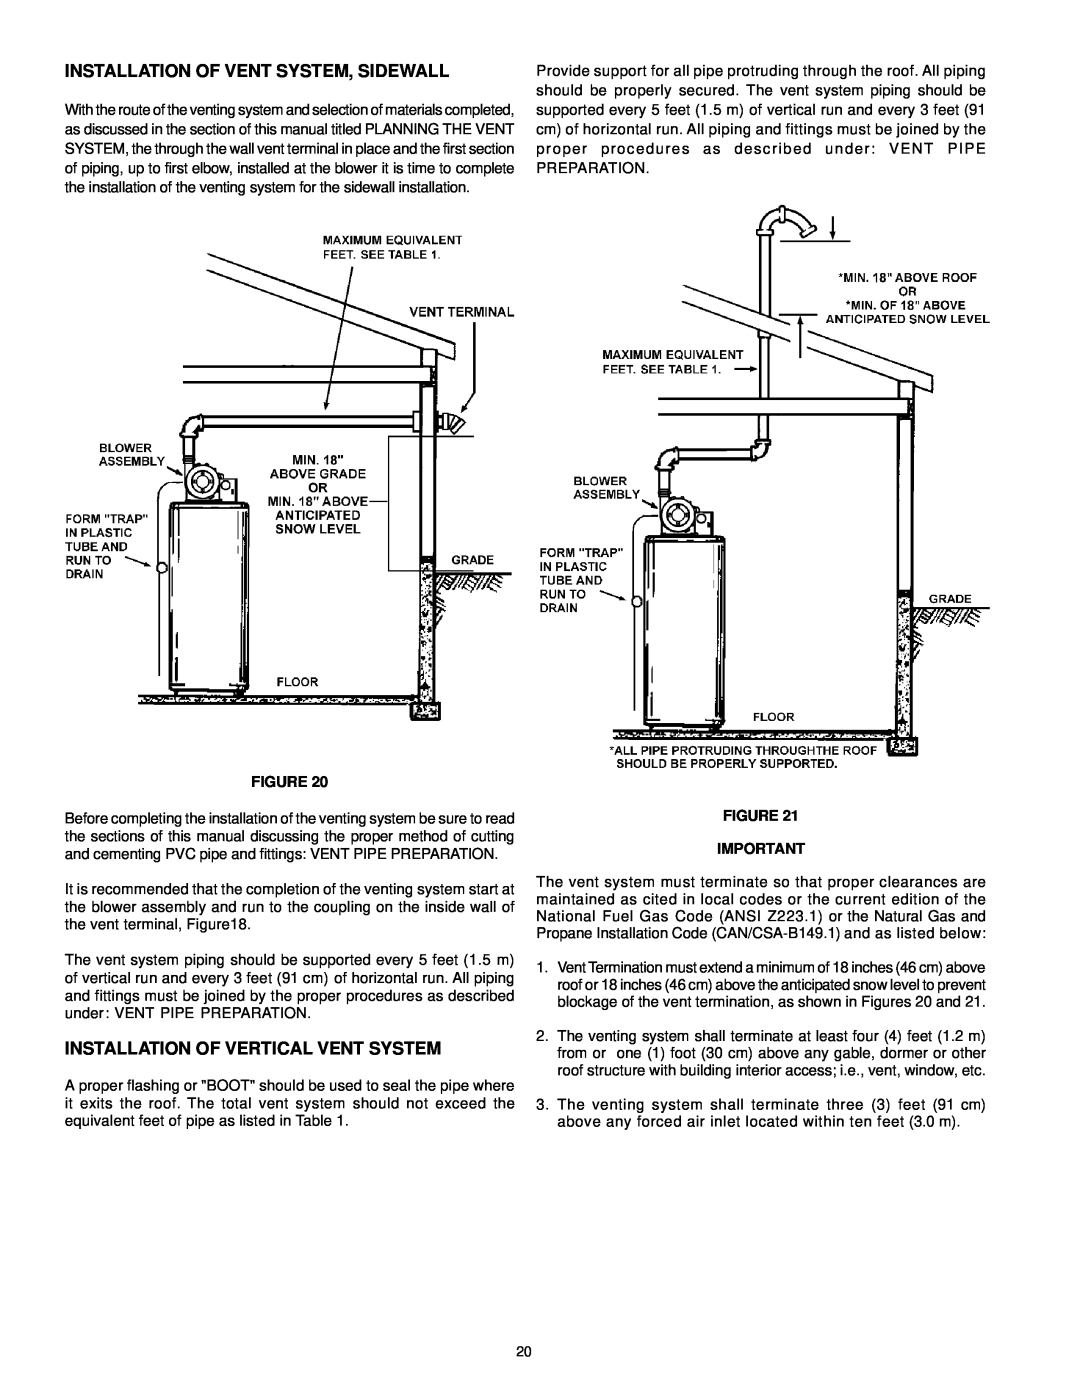 A.O. Smith ARGSS02708 instruction manual Installation Of Vent System, Sidewall, Installation Of Vertical Vent System 